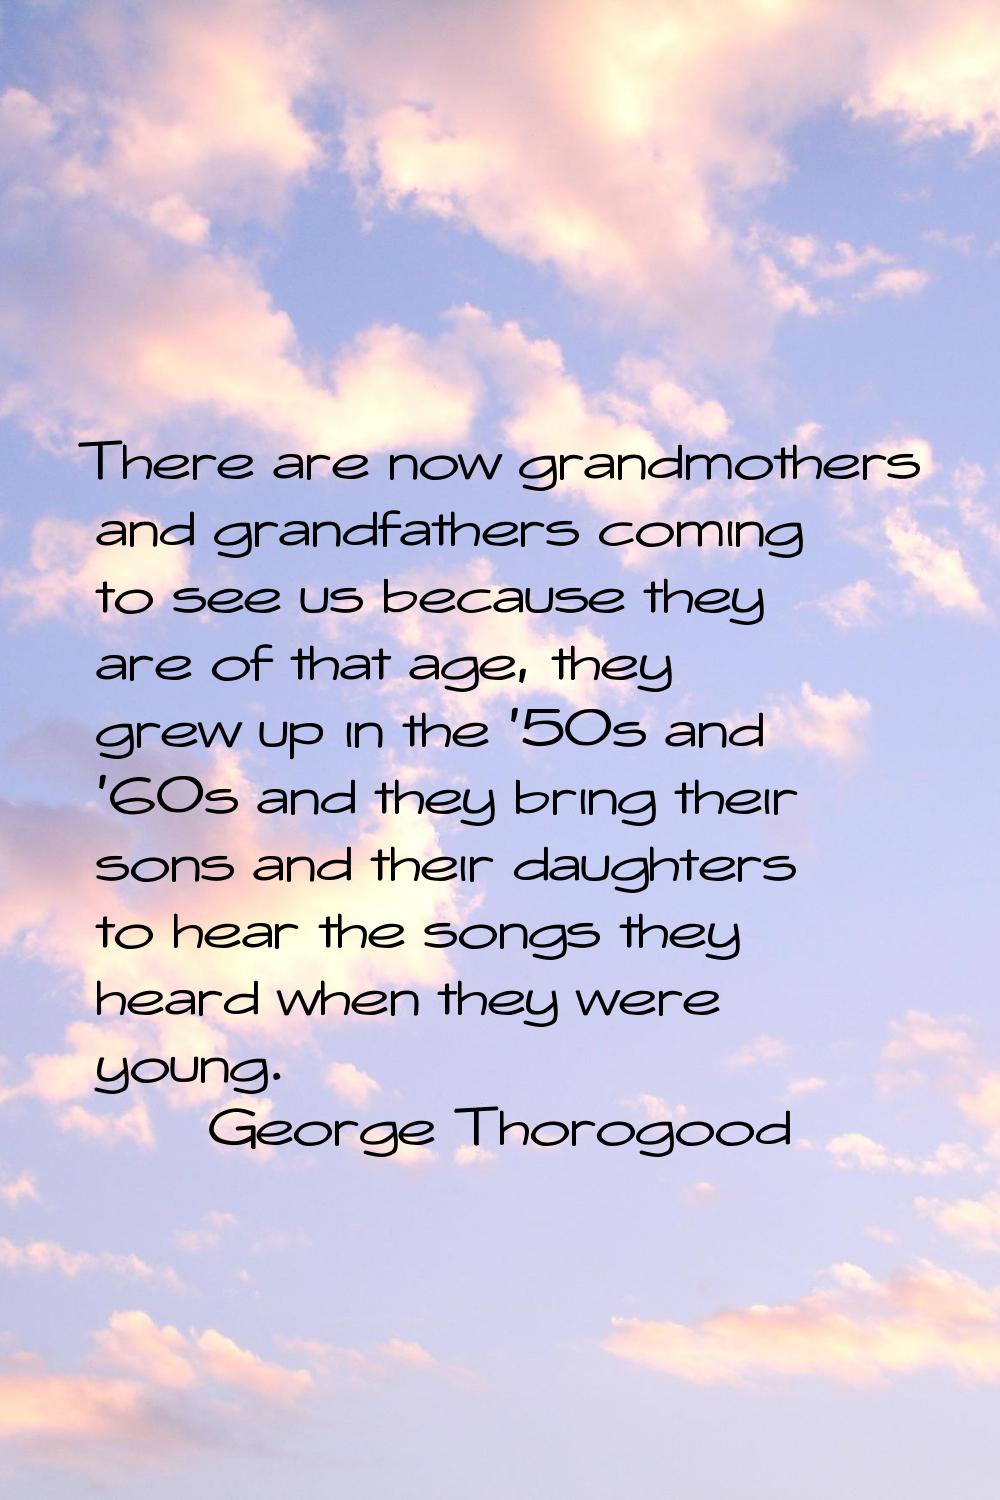 There are now grandmothers and grandfathers coming to see us because they are of that age, they gre